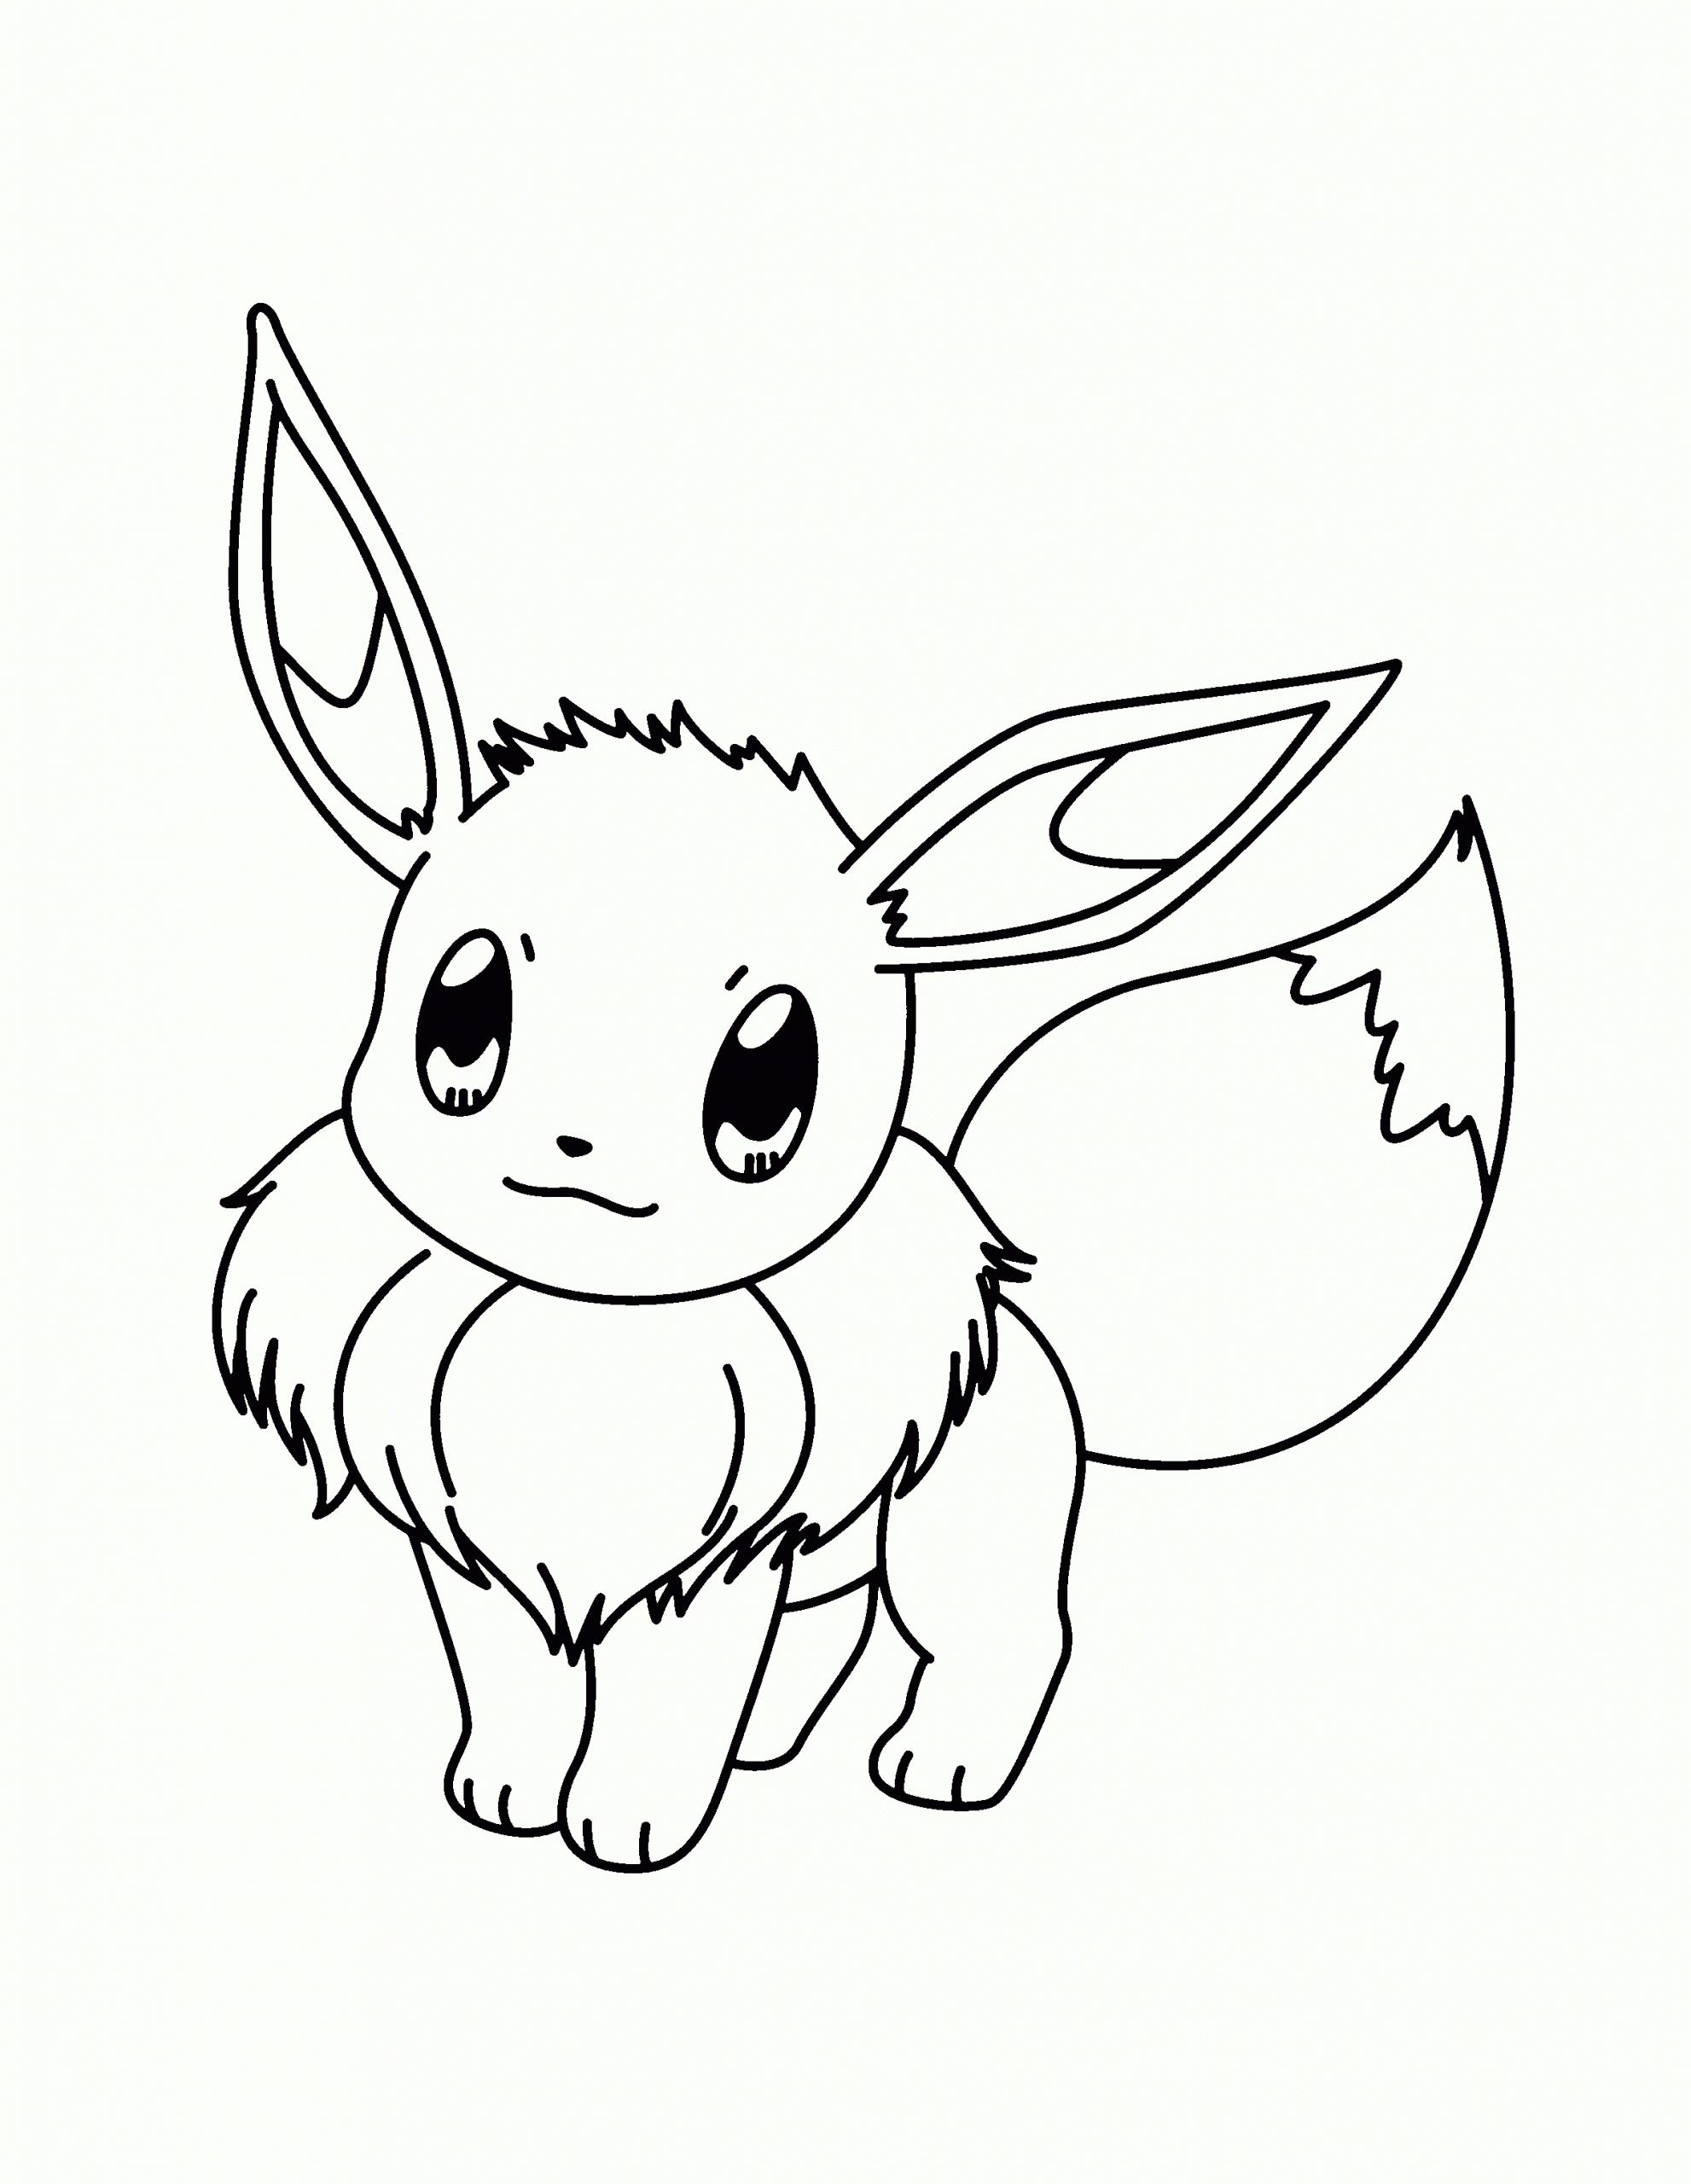 Coloring Pages Pokémon: Animated Images, Gifs, Pictures concernant Coloriage Pokemon V